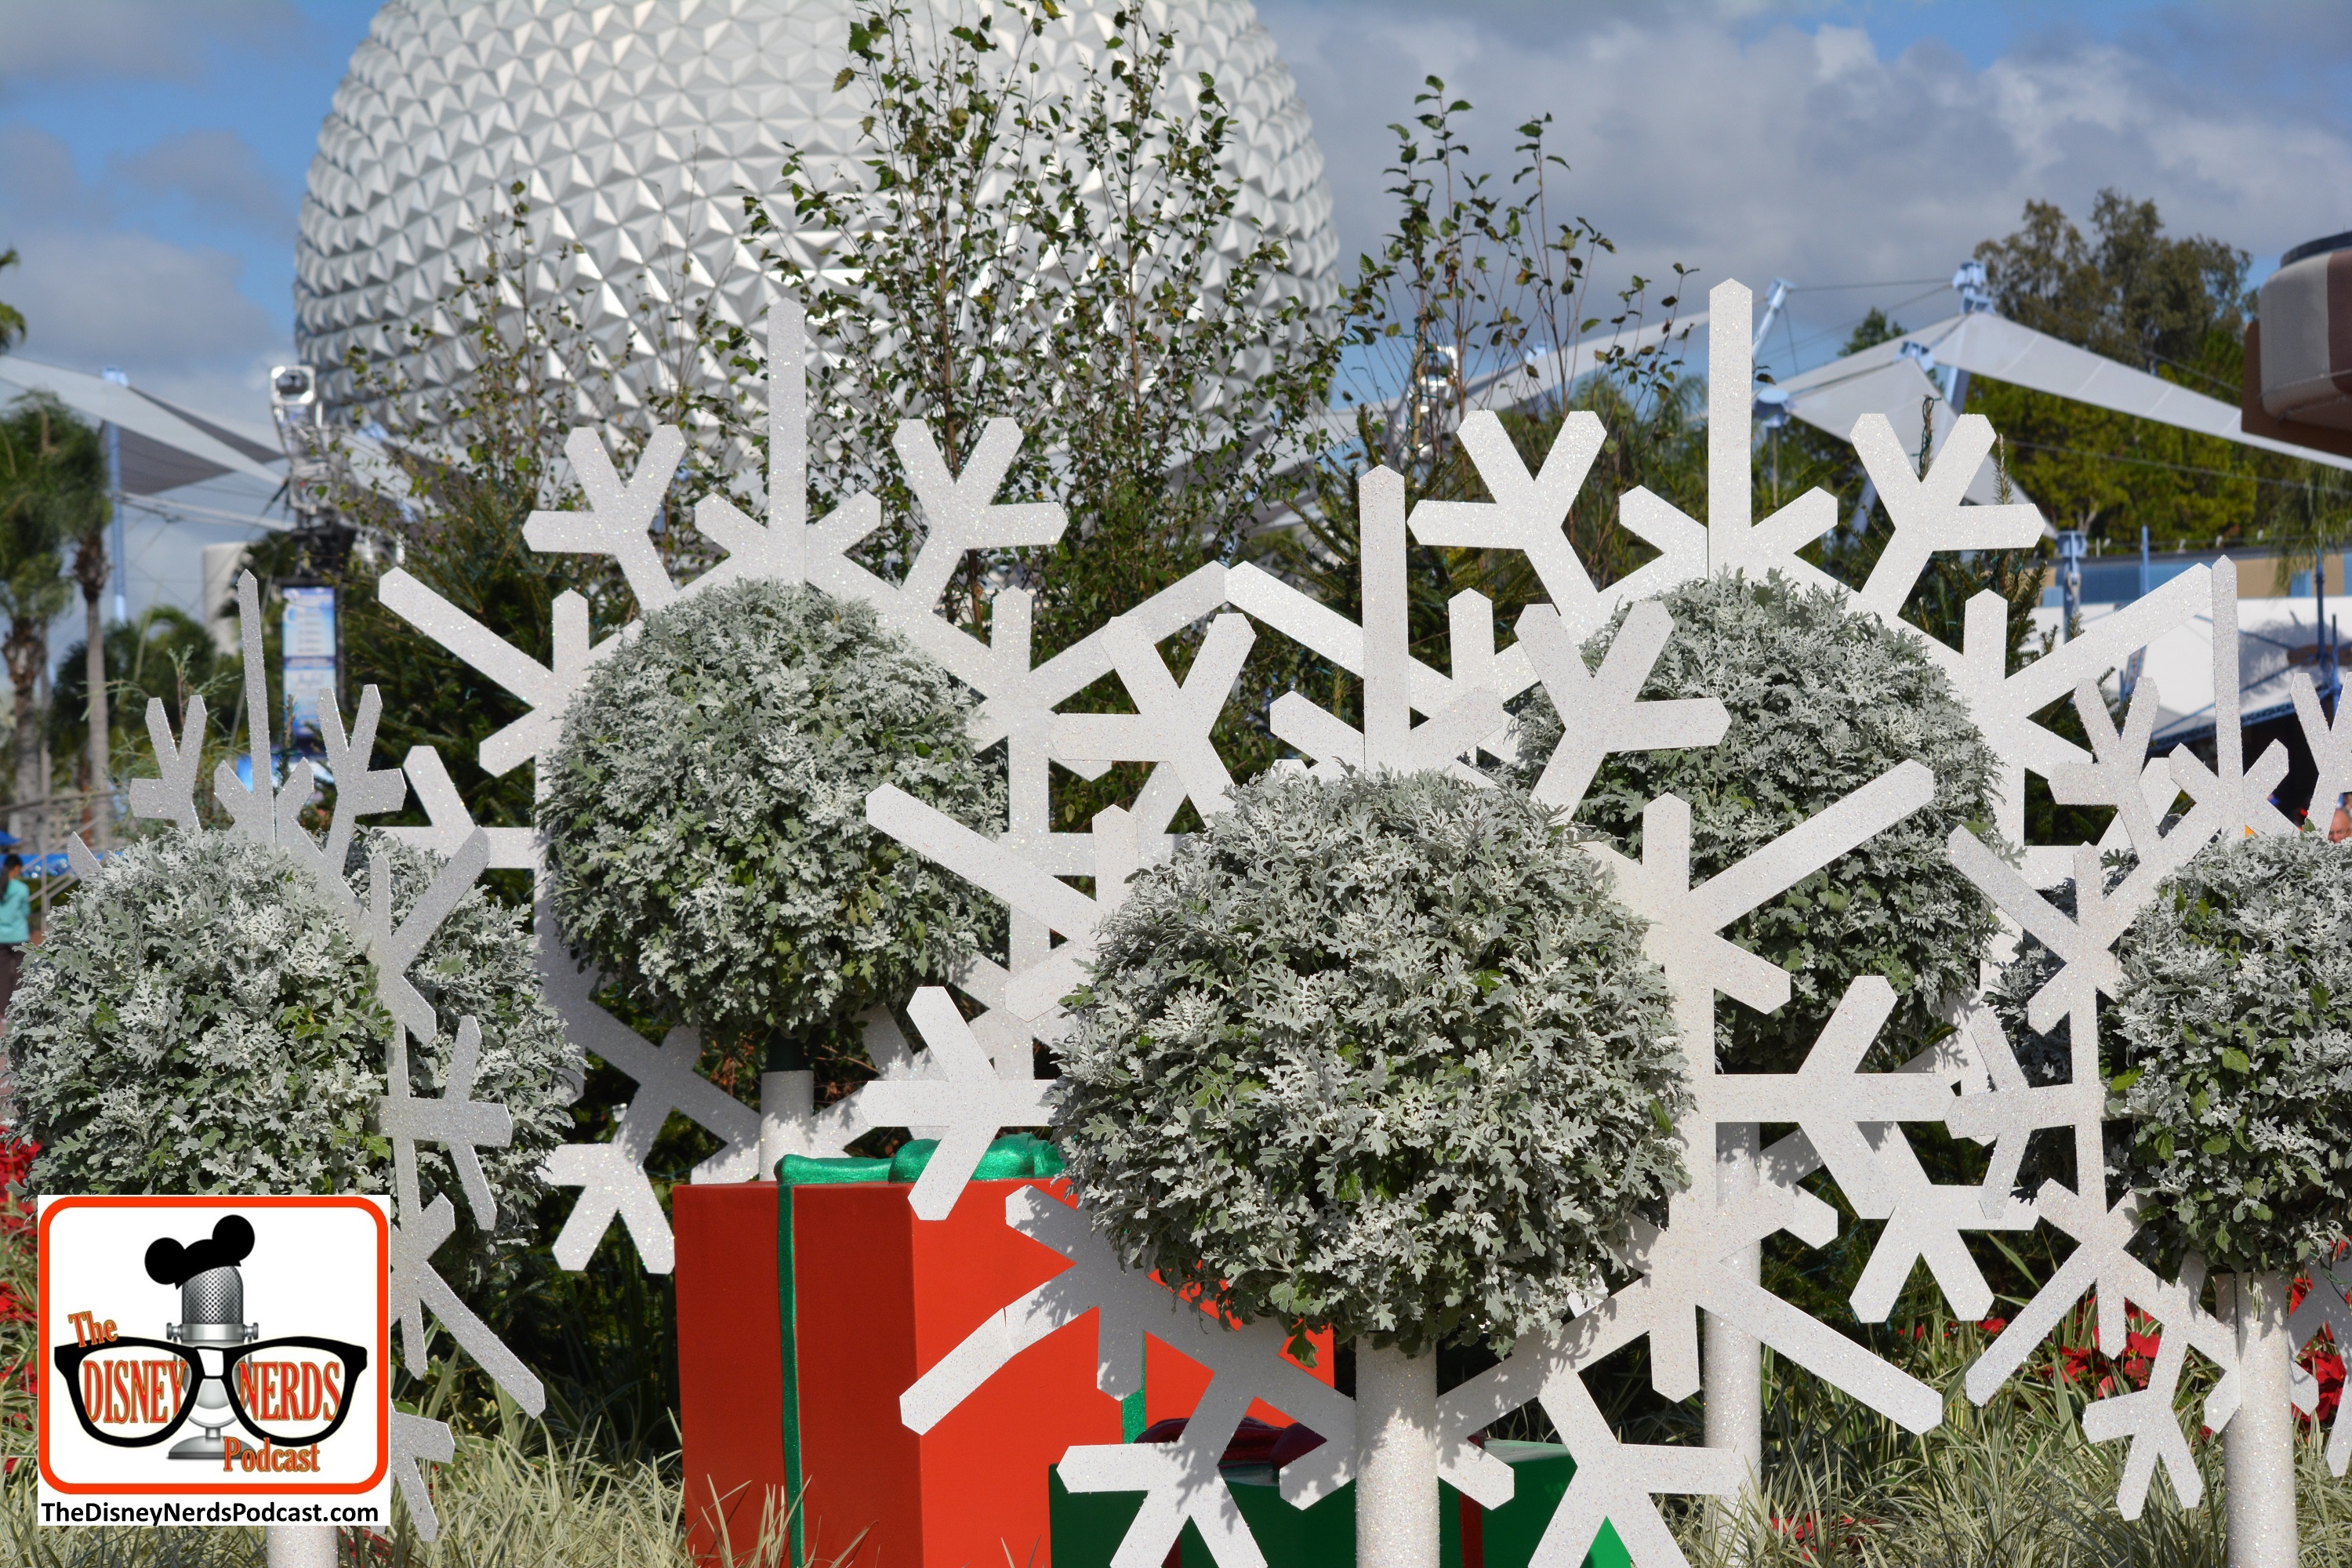 2015-12 - Epcot - The Holidays are in full Swing at Epcot's "Holidays Around the World"